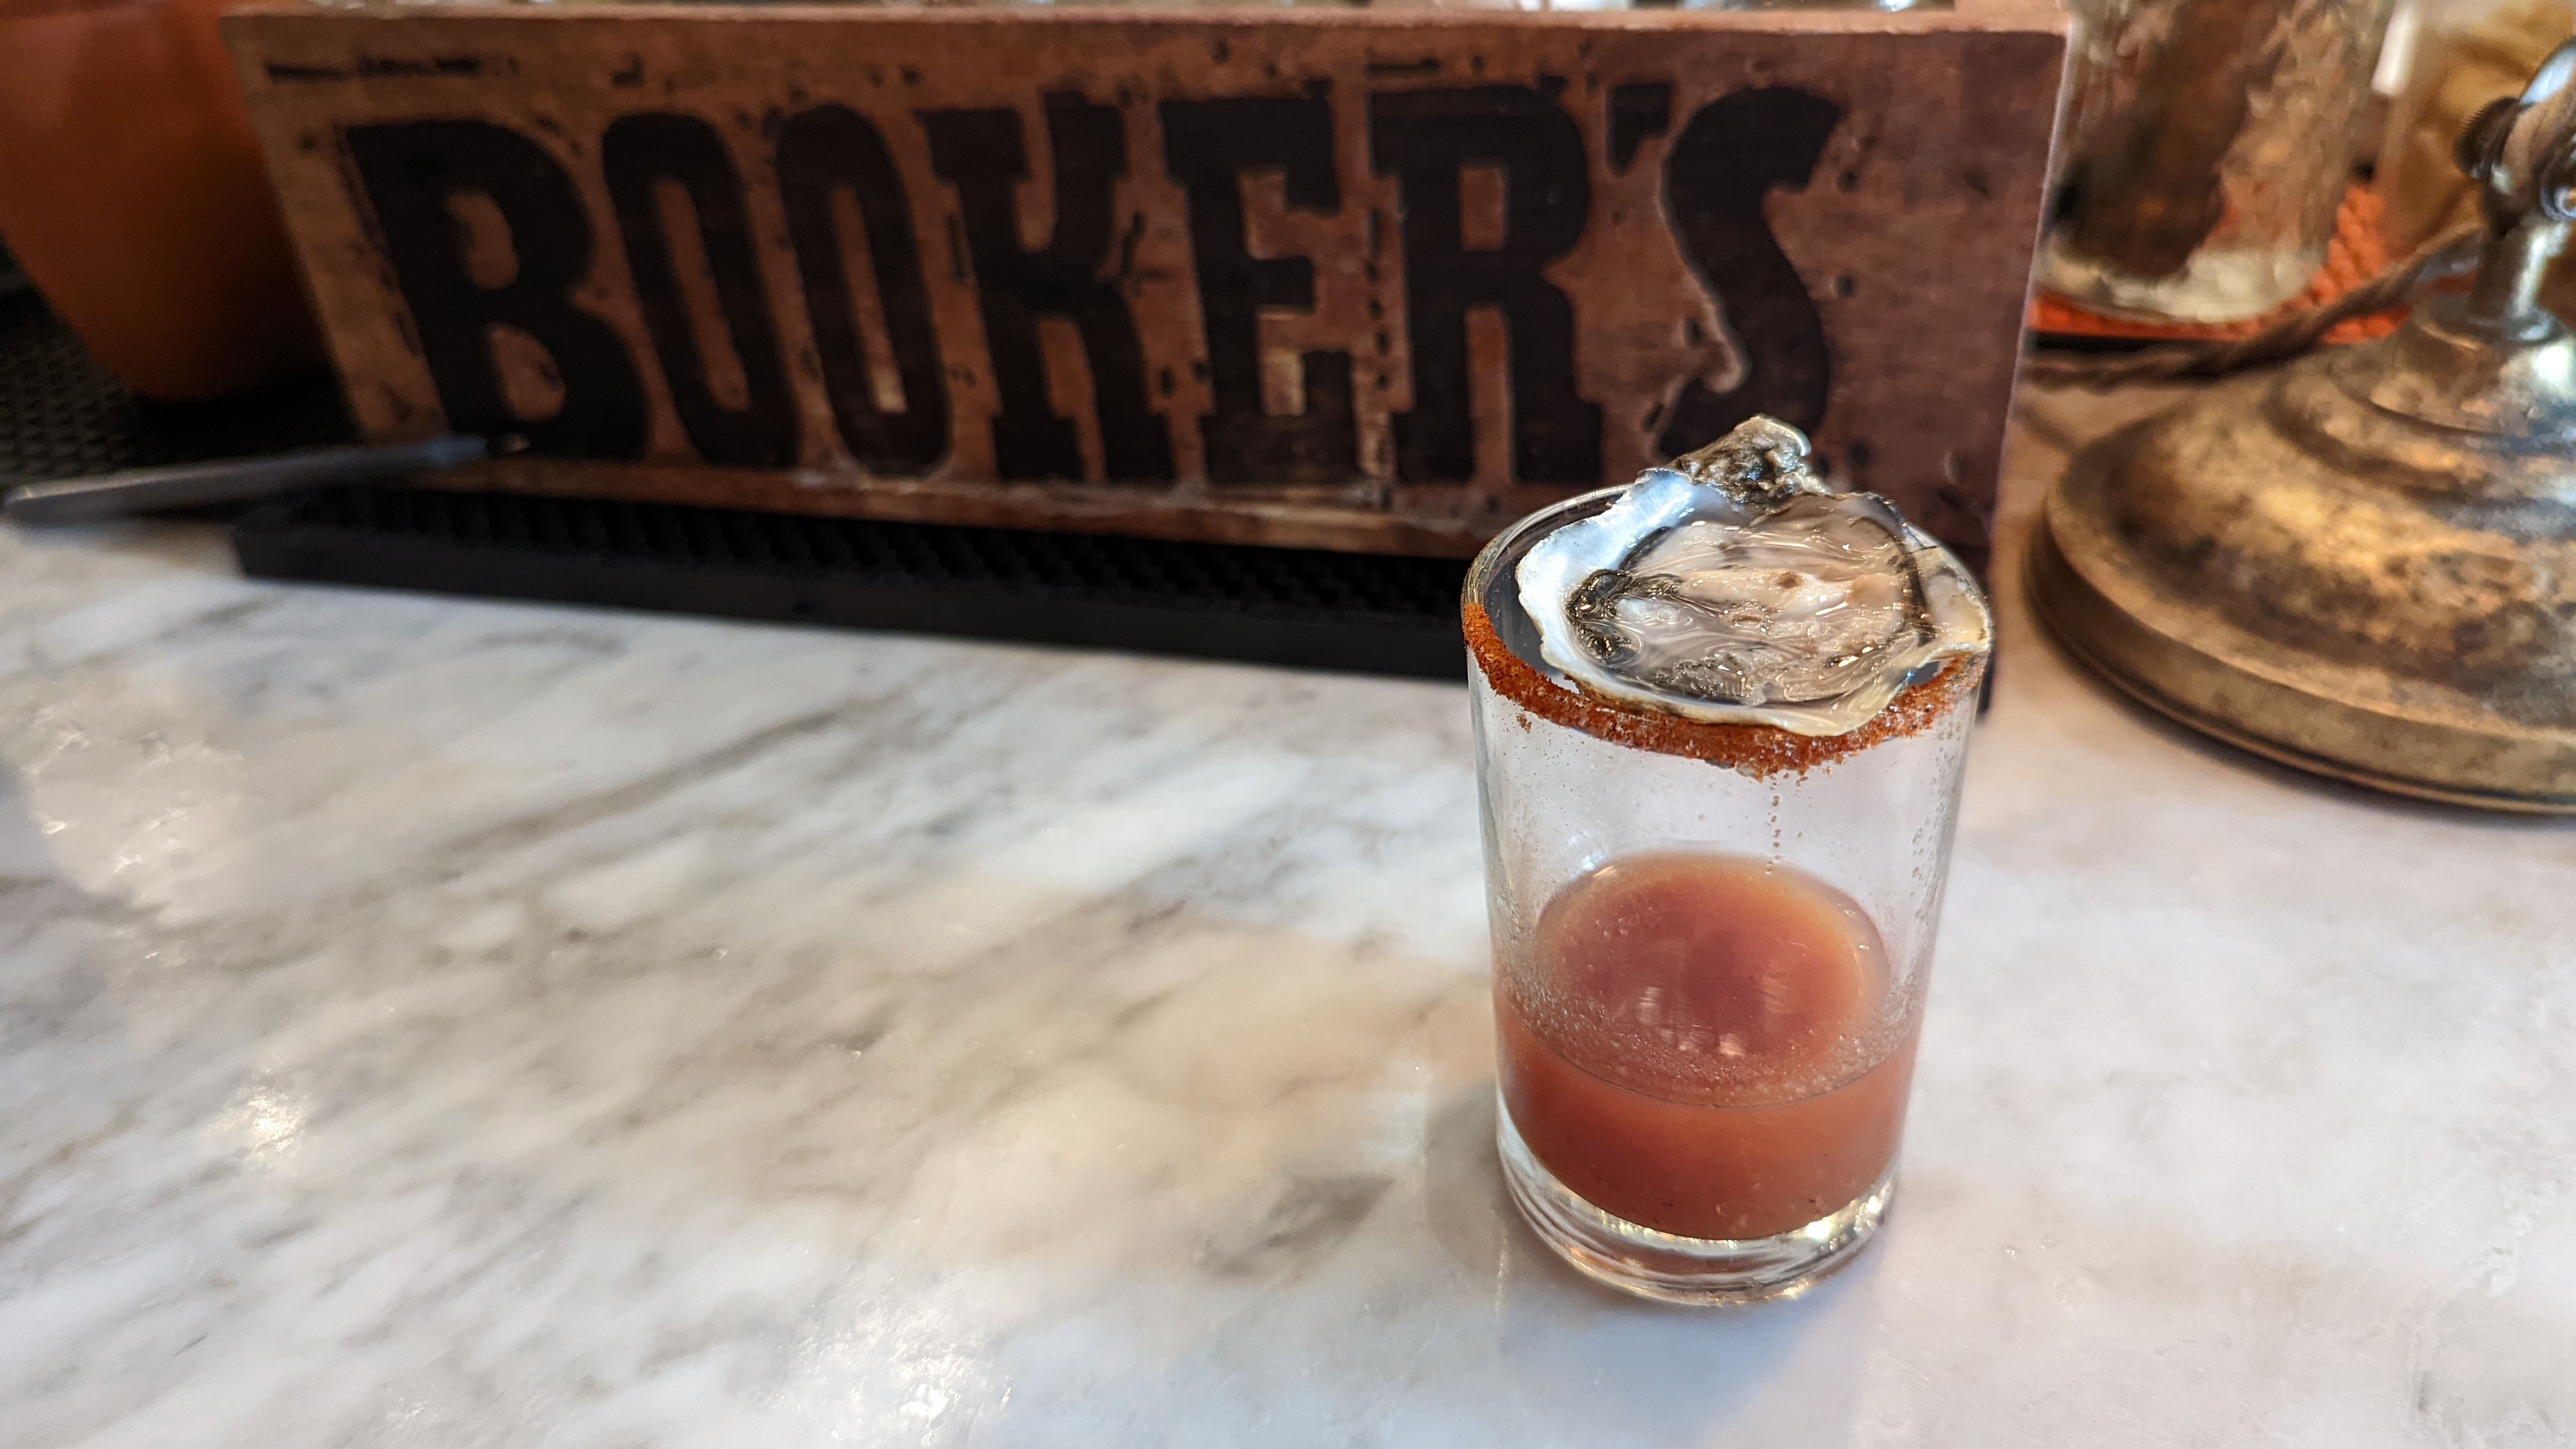 A shot glass of bloody mary mix with an oyster on top.